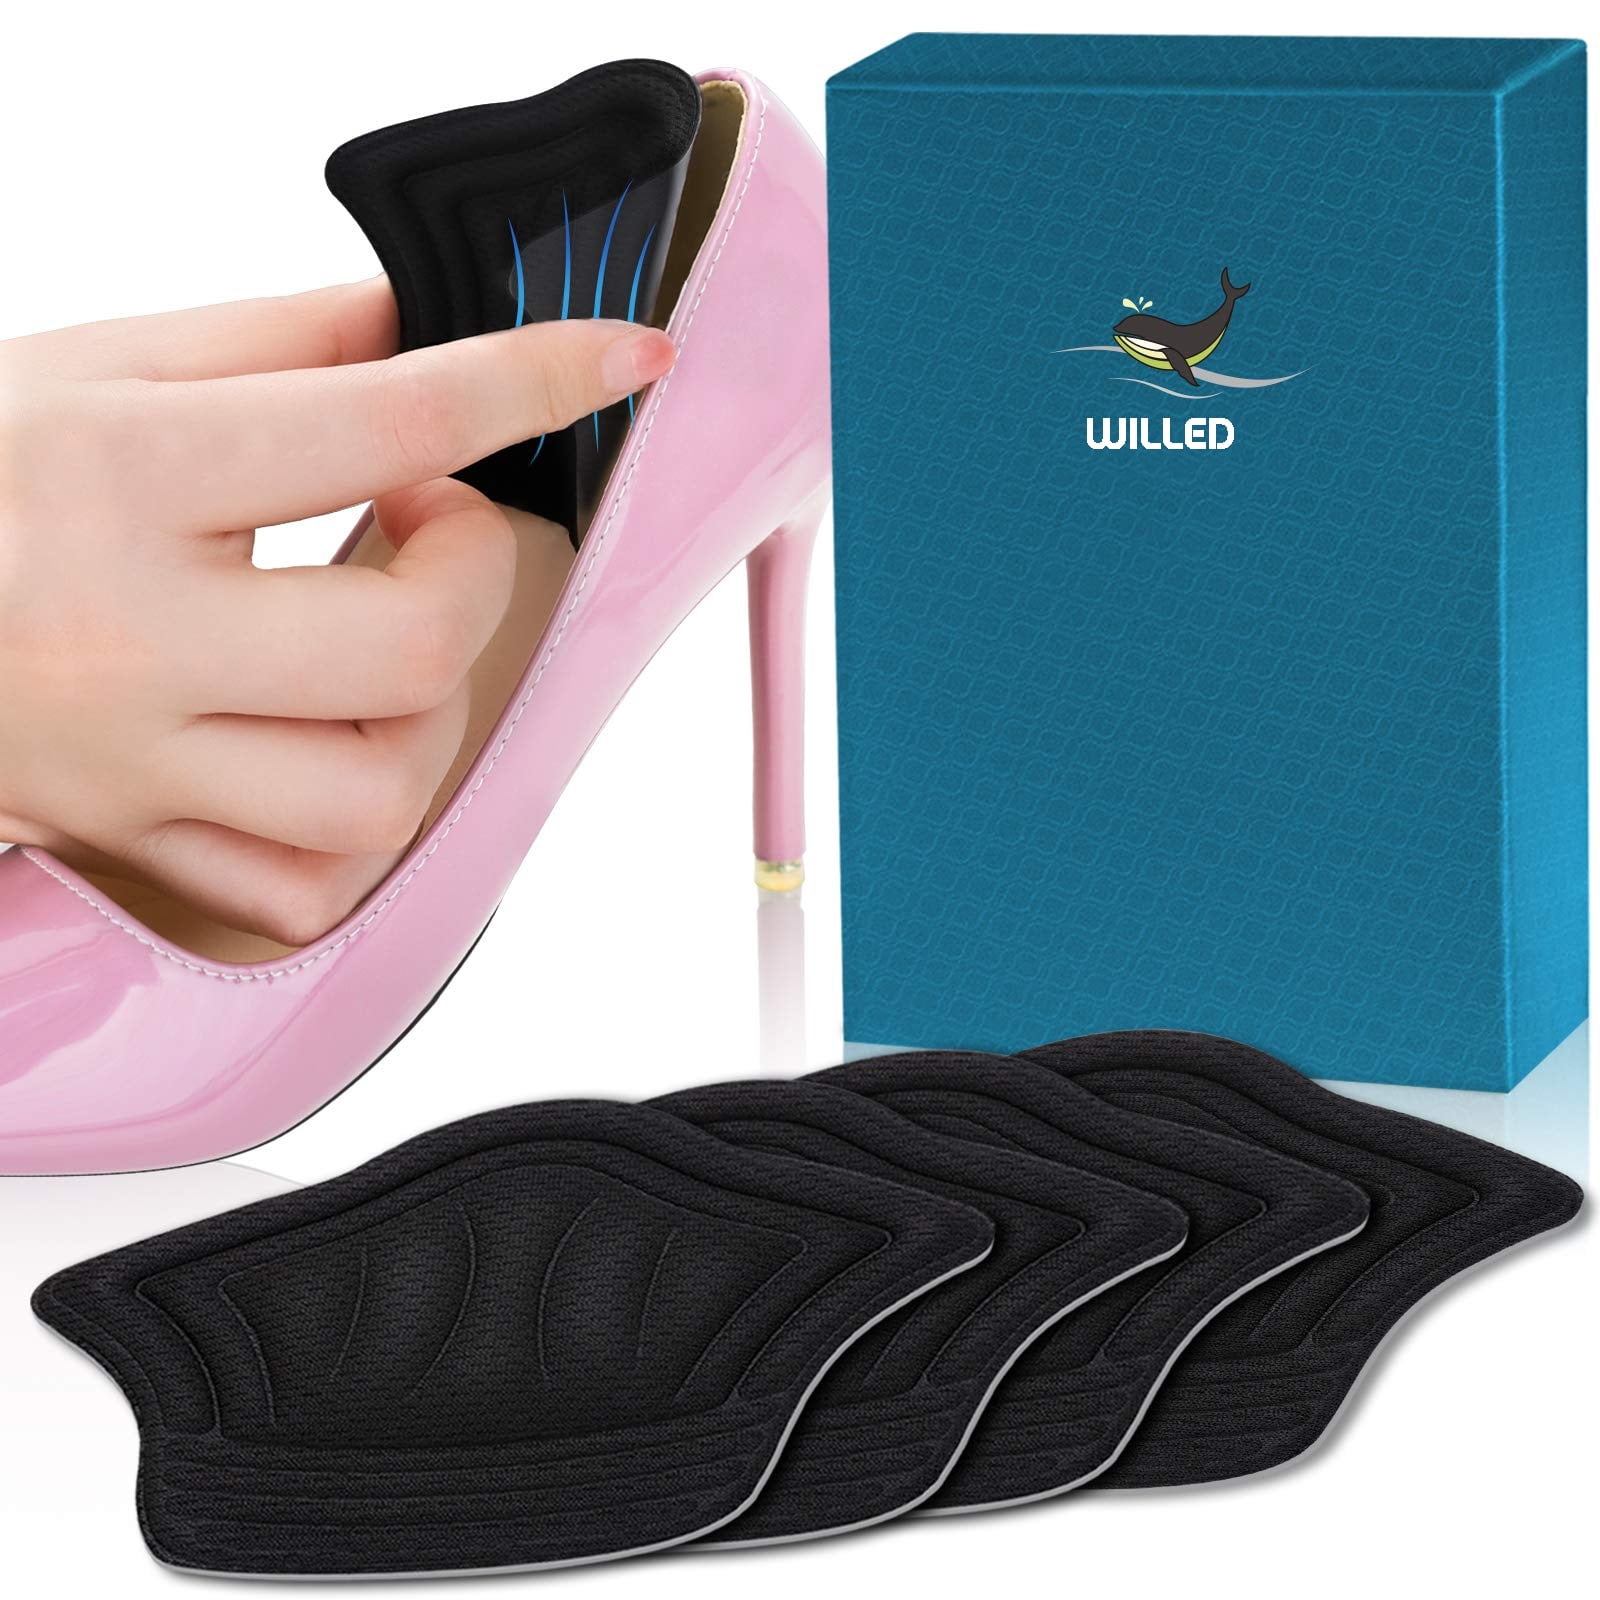 WILLED Heel Grips for High Heels, 6 Pairs Heel Pads for Shoes That are Too  Big Women, Nude Heel Inserts for Loose Shoes, Prevent Rubbing Blisters,  Anti Slip Out Heel Cushions for